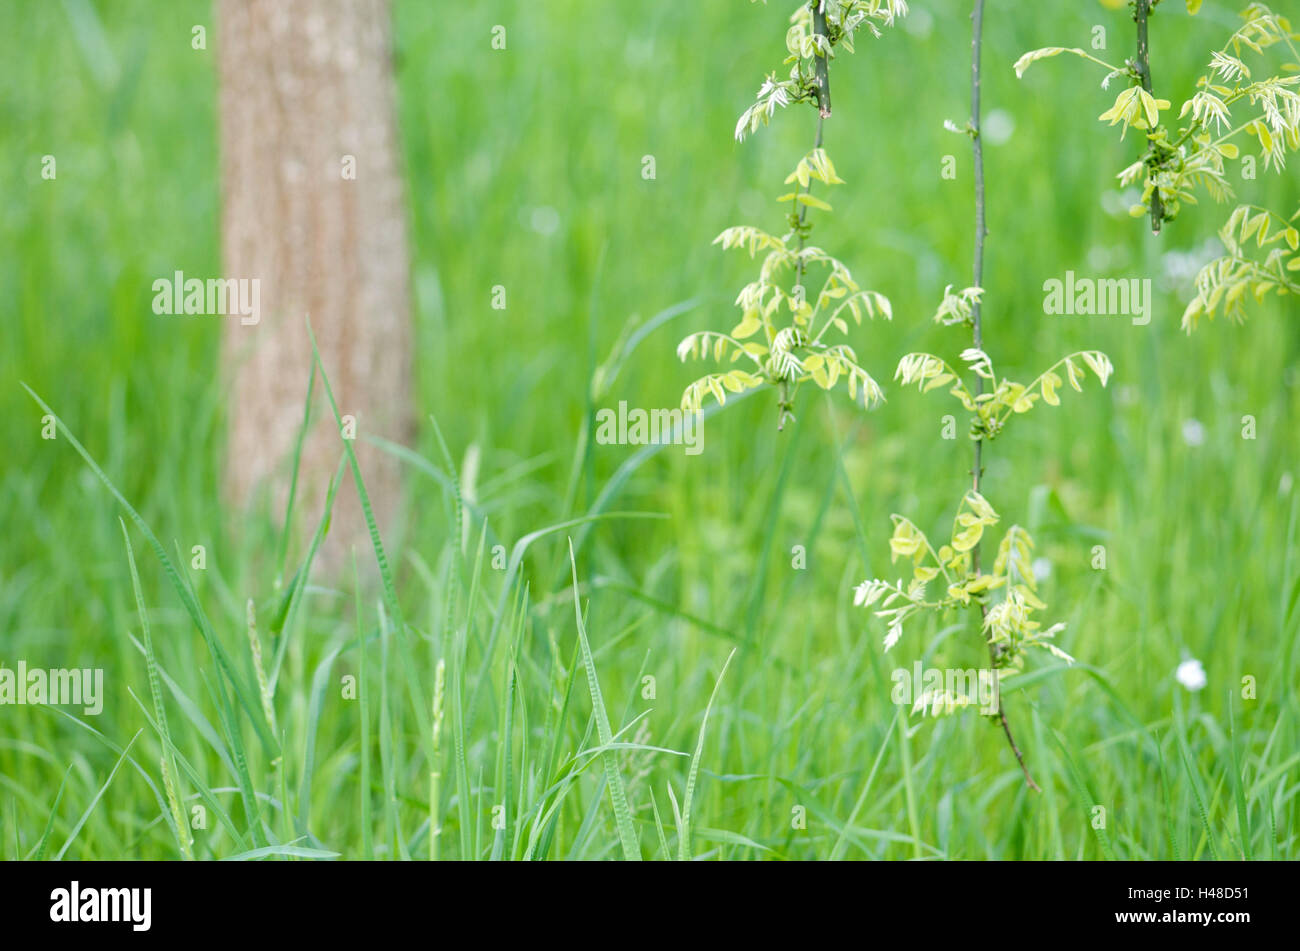 Japanese pagoda tree, Styphnolobium japonicum, branches, hanging, close-up, meadow, detail, Stock Photo